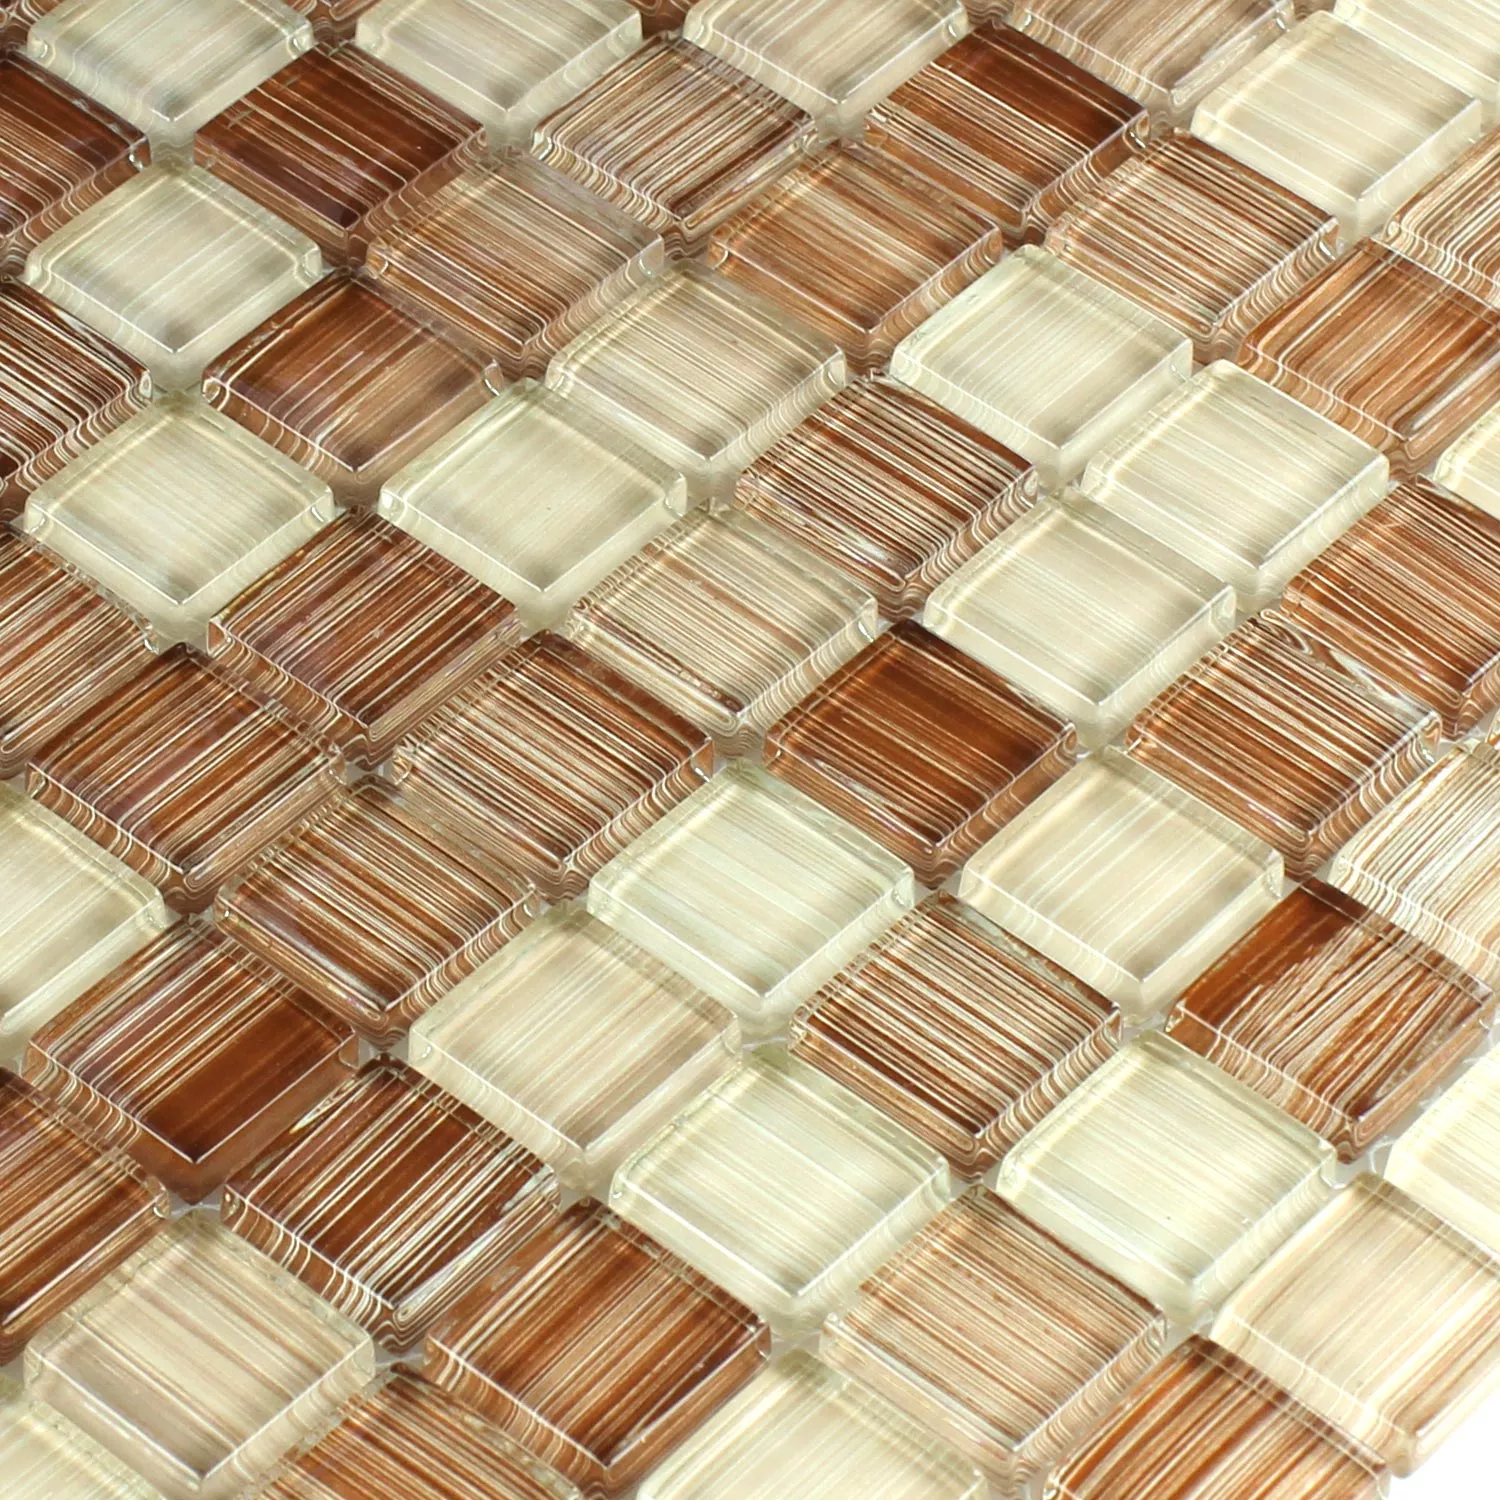 Sample Mosaic Tiles Glass Brown Beige Striped